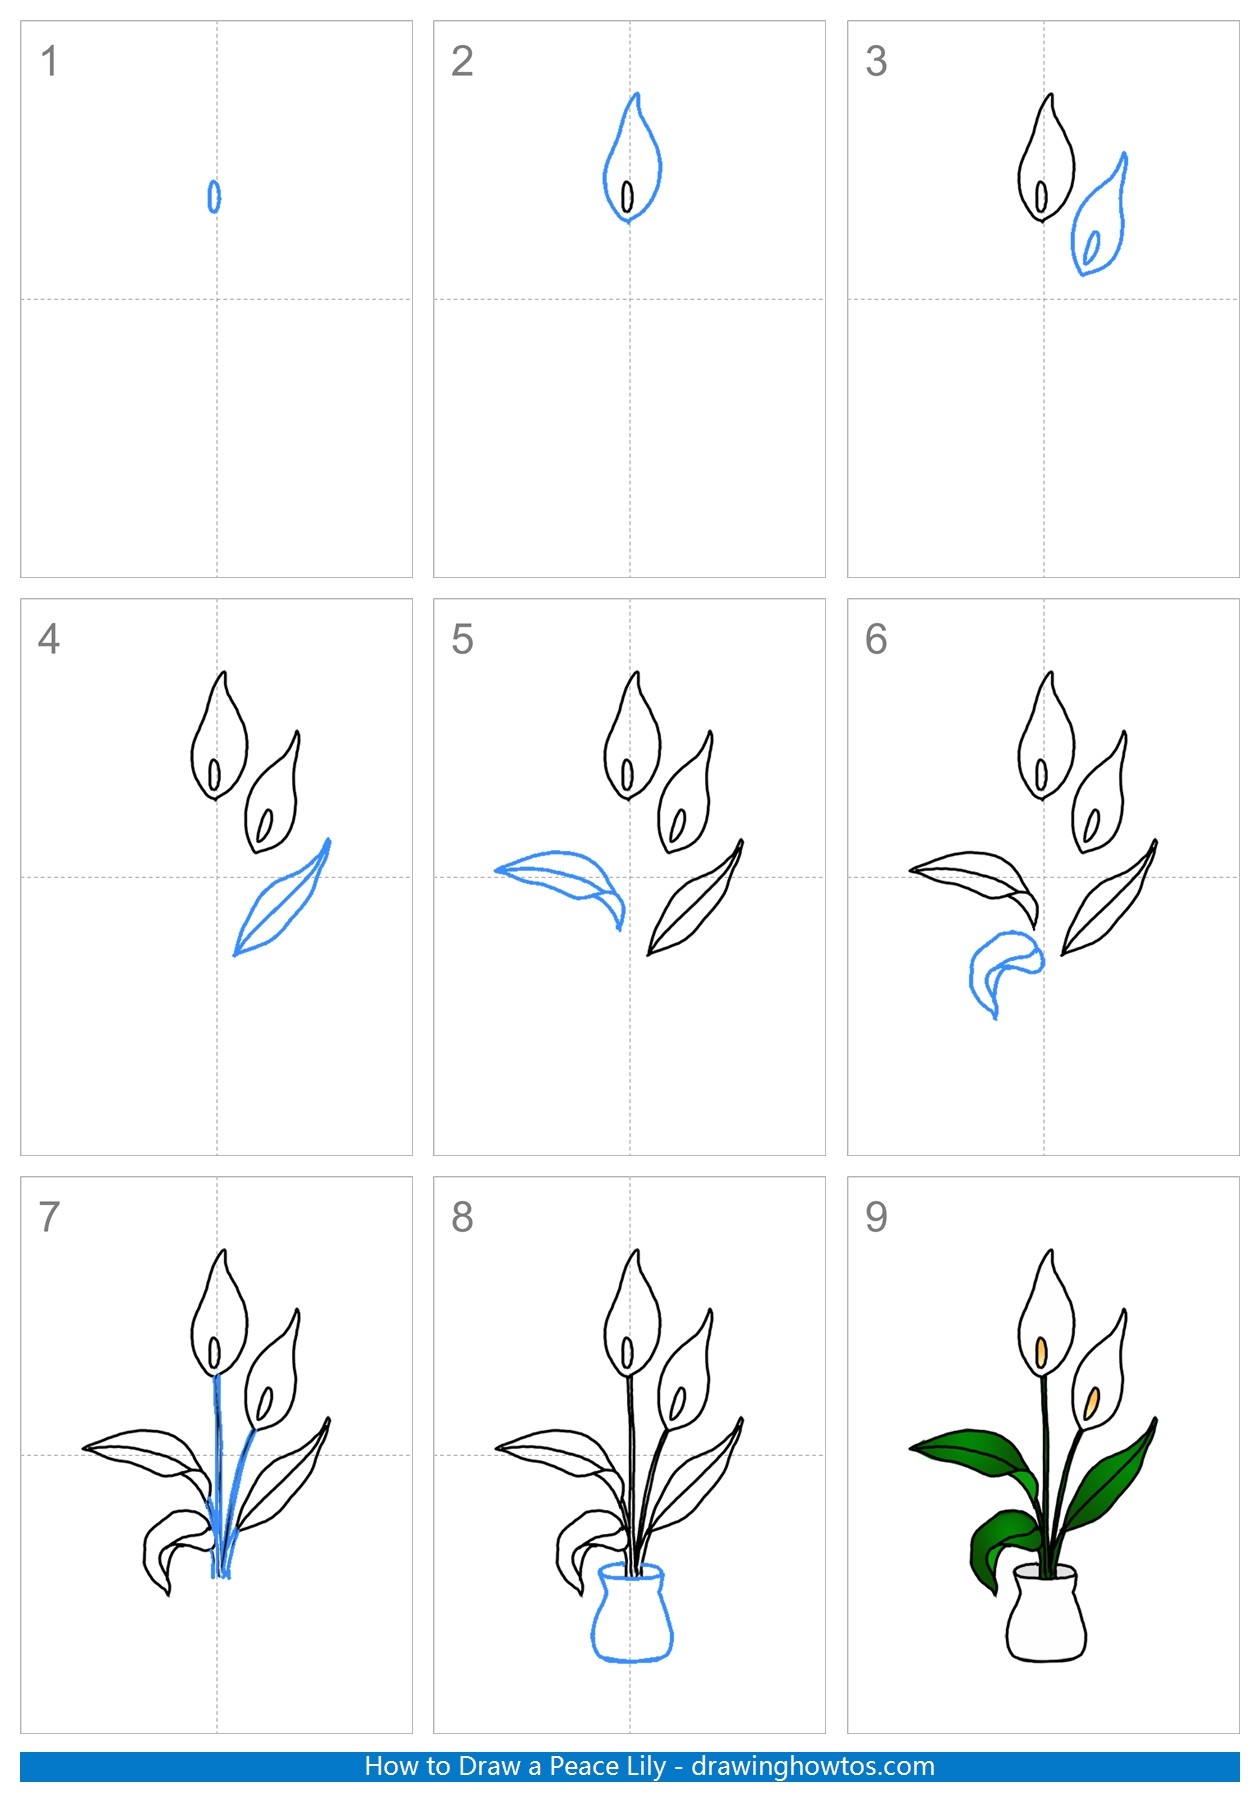 How to Draw Peace Lily Step by Step